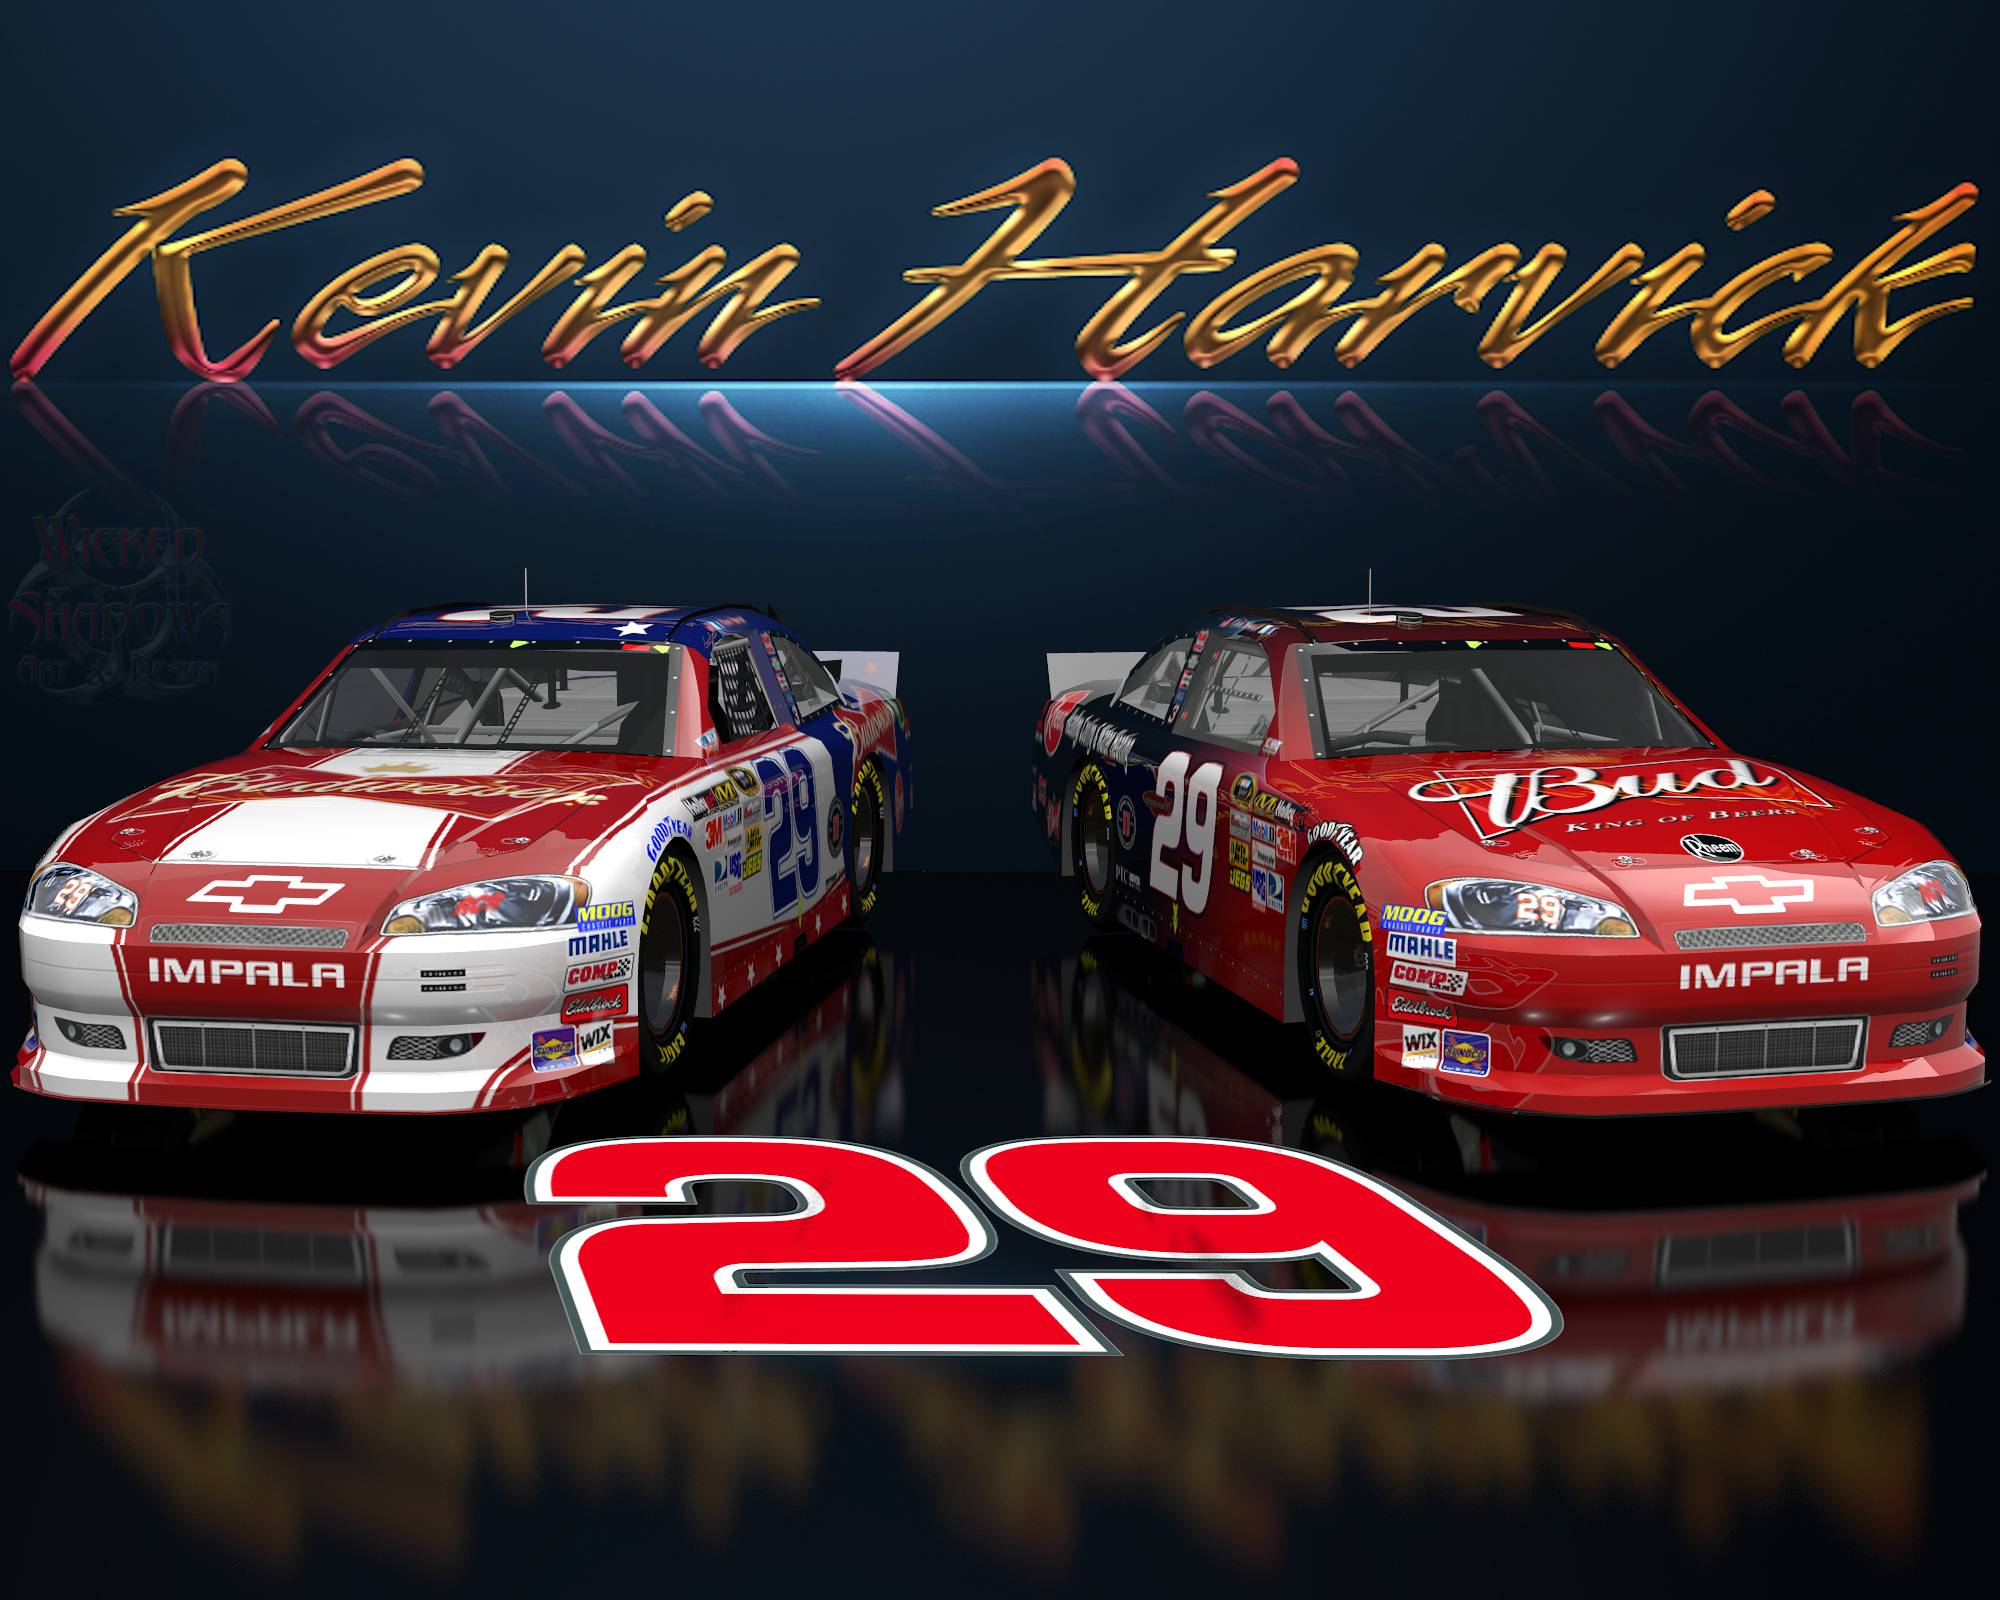 Wallpaper By Wicked Shadows: NASCAR Wallpaper